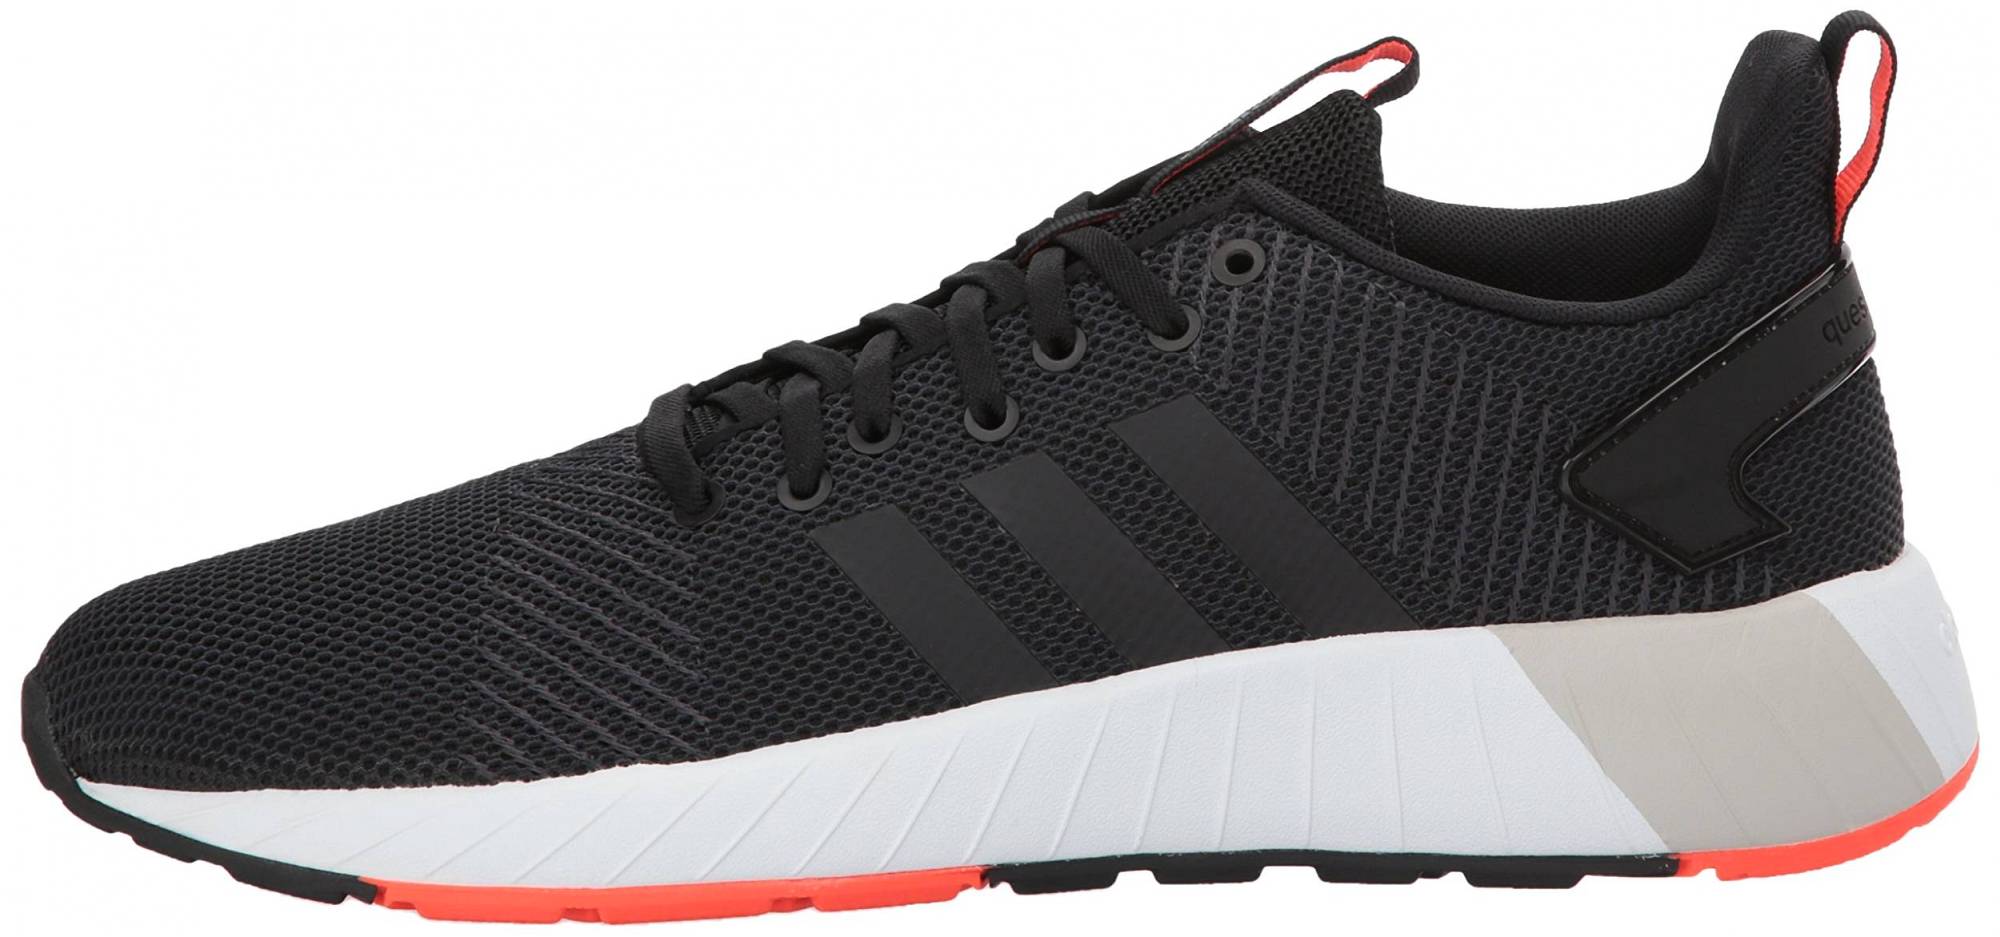 Adidas Questar BYD – Shoes Reviews & Reasons To Buy